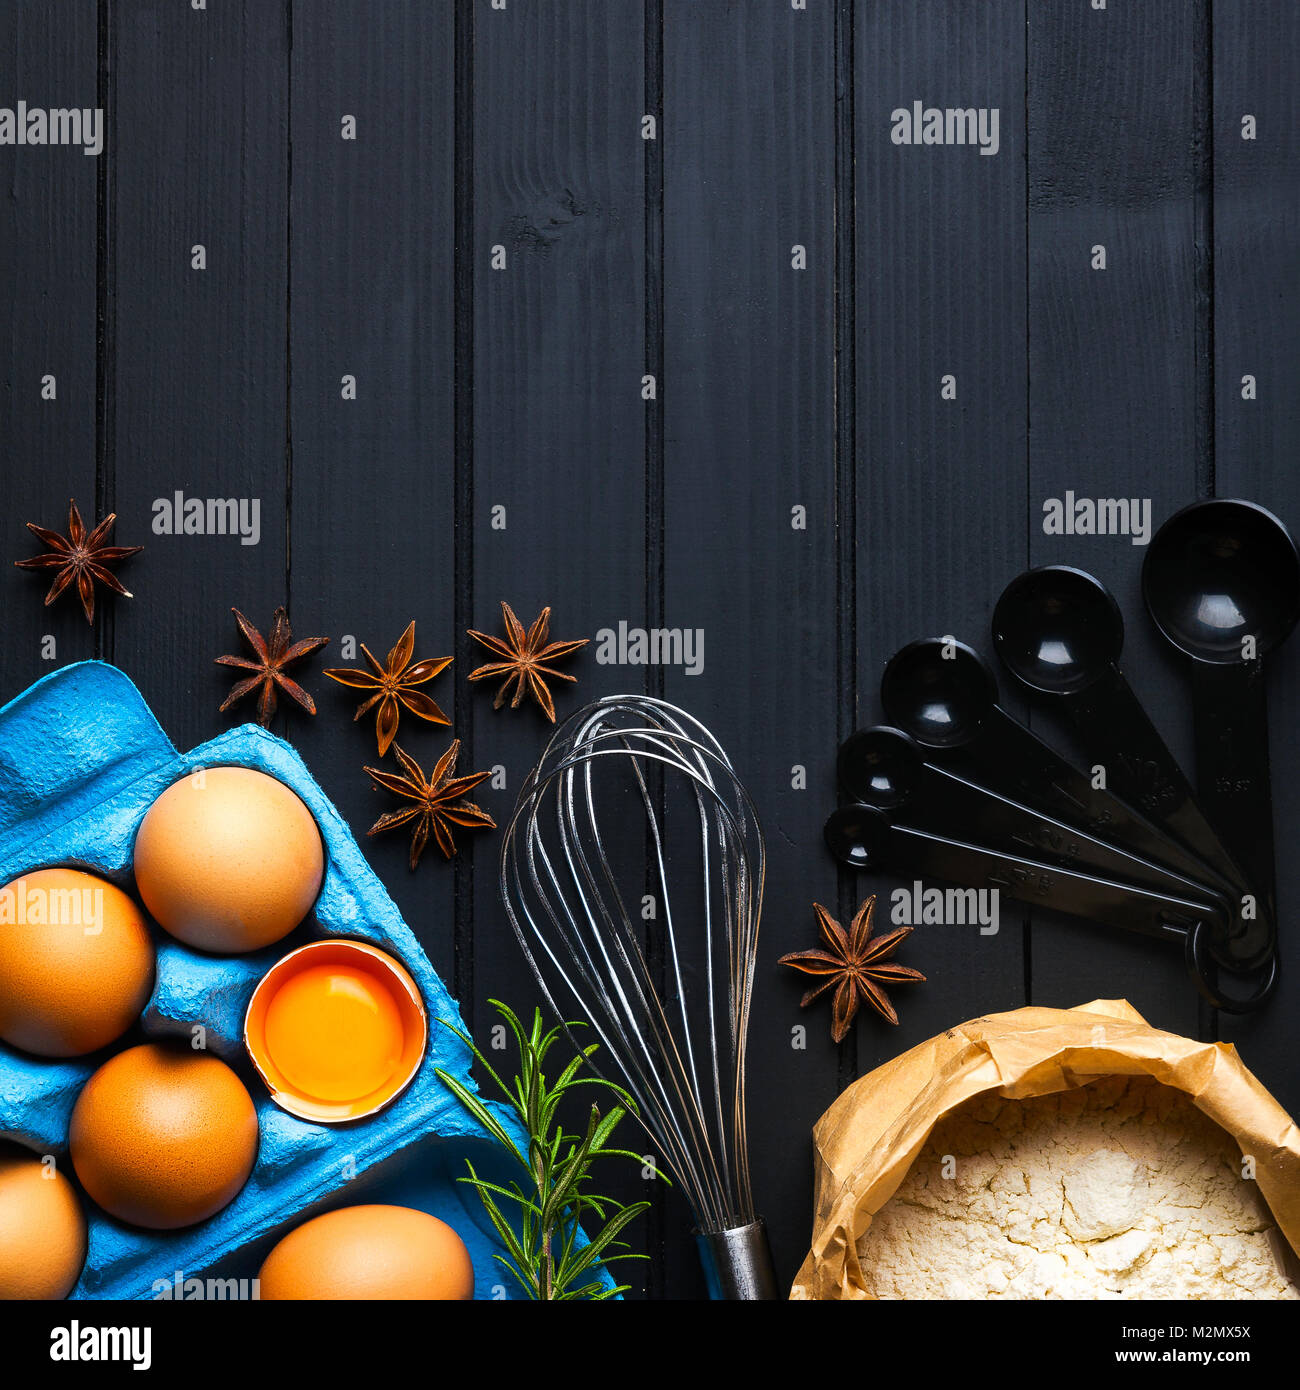 Kitchen utensils background with copyspace, home kitchen decor concept, kitchen  tools, rubber accessories in container. Restaurant, cooking, culinary,  kitchen theme. Silicone spatulas and brushes Stock Photo